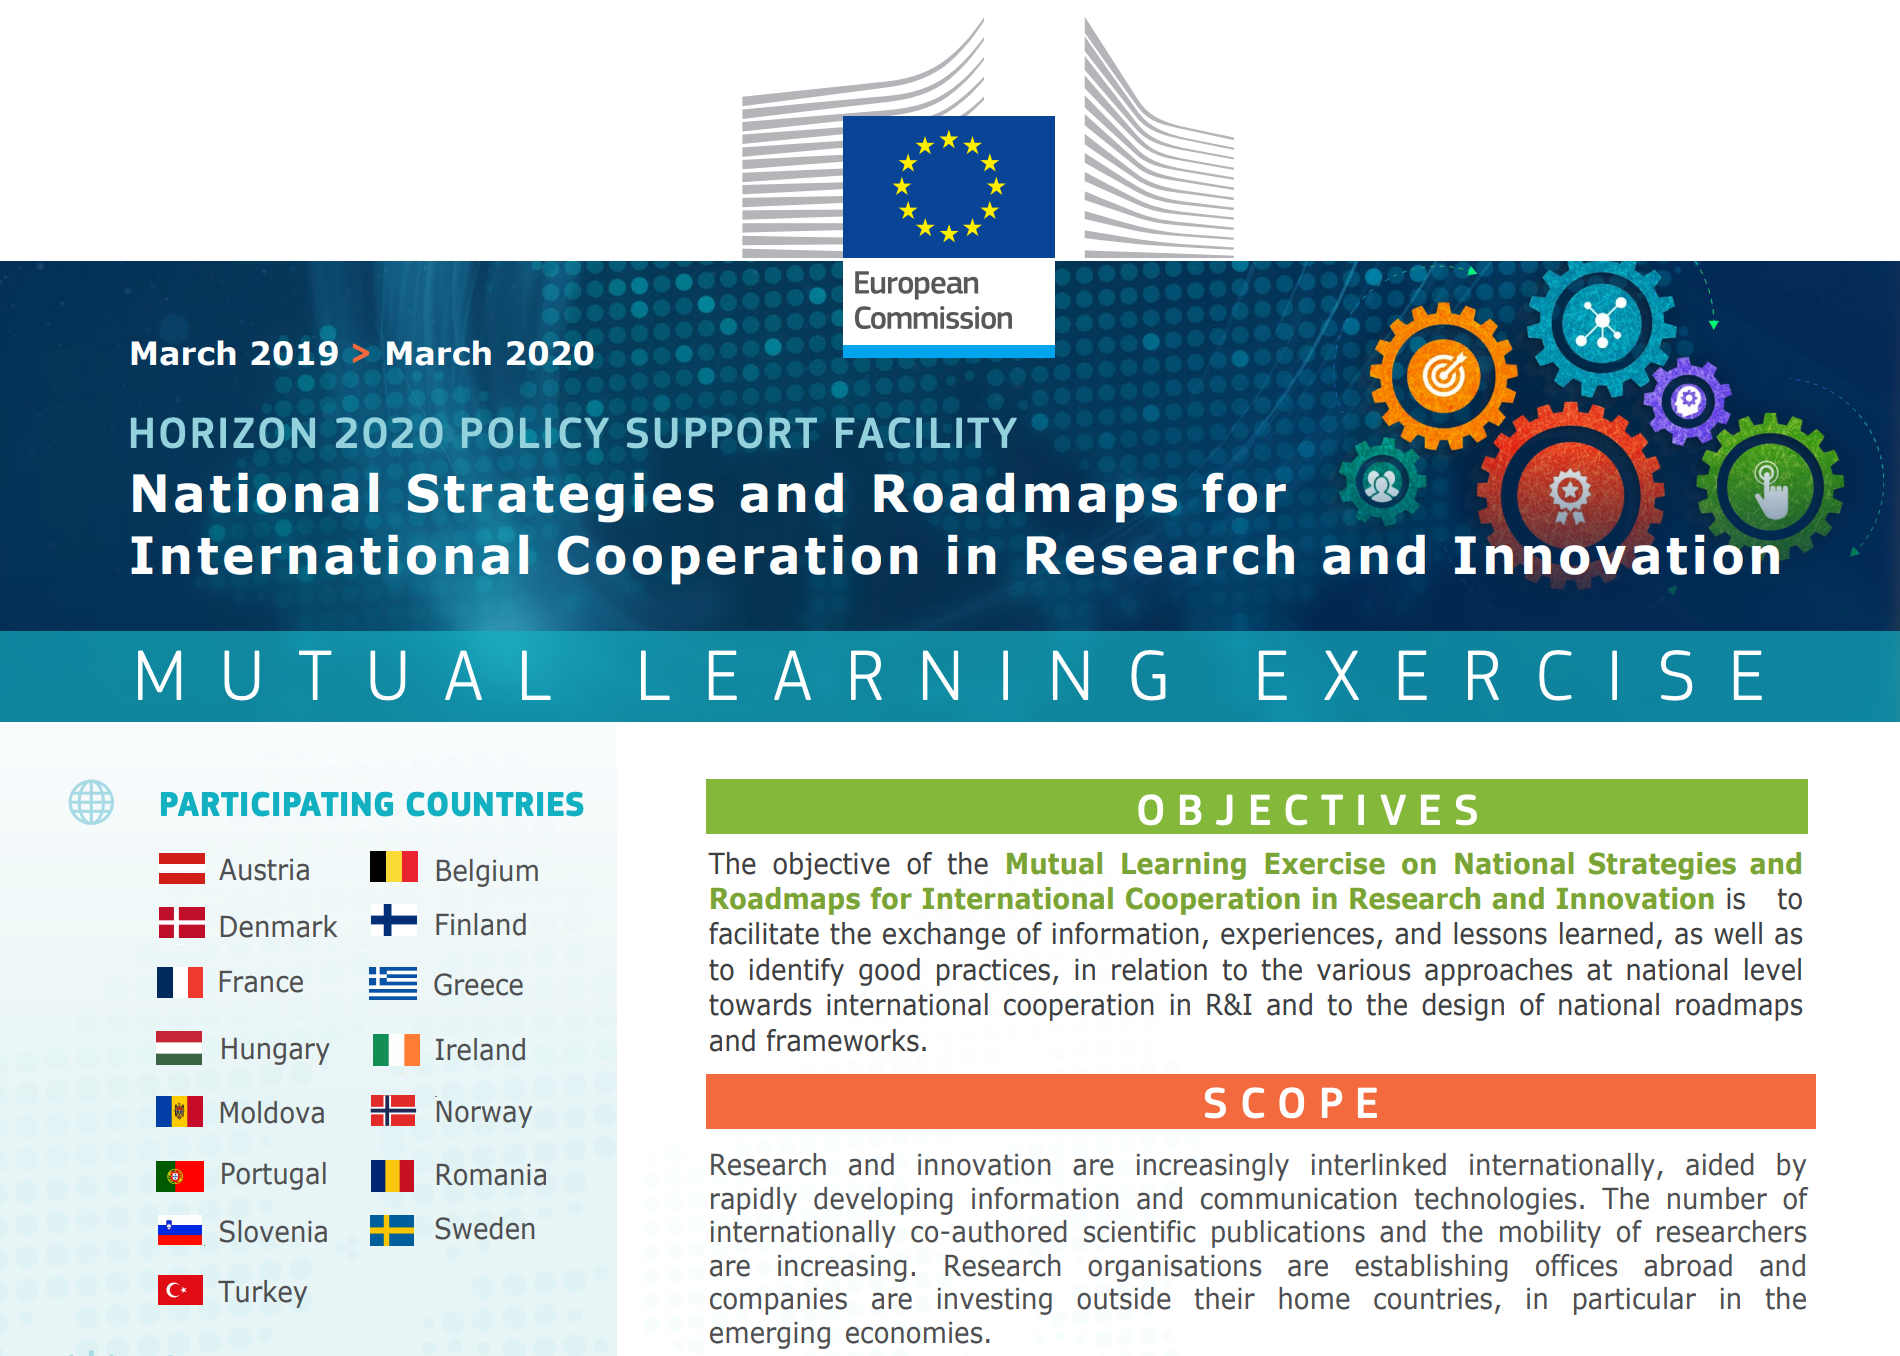 National strategies and roadmaps for international R&I Cooperation